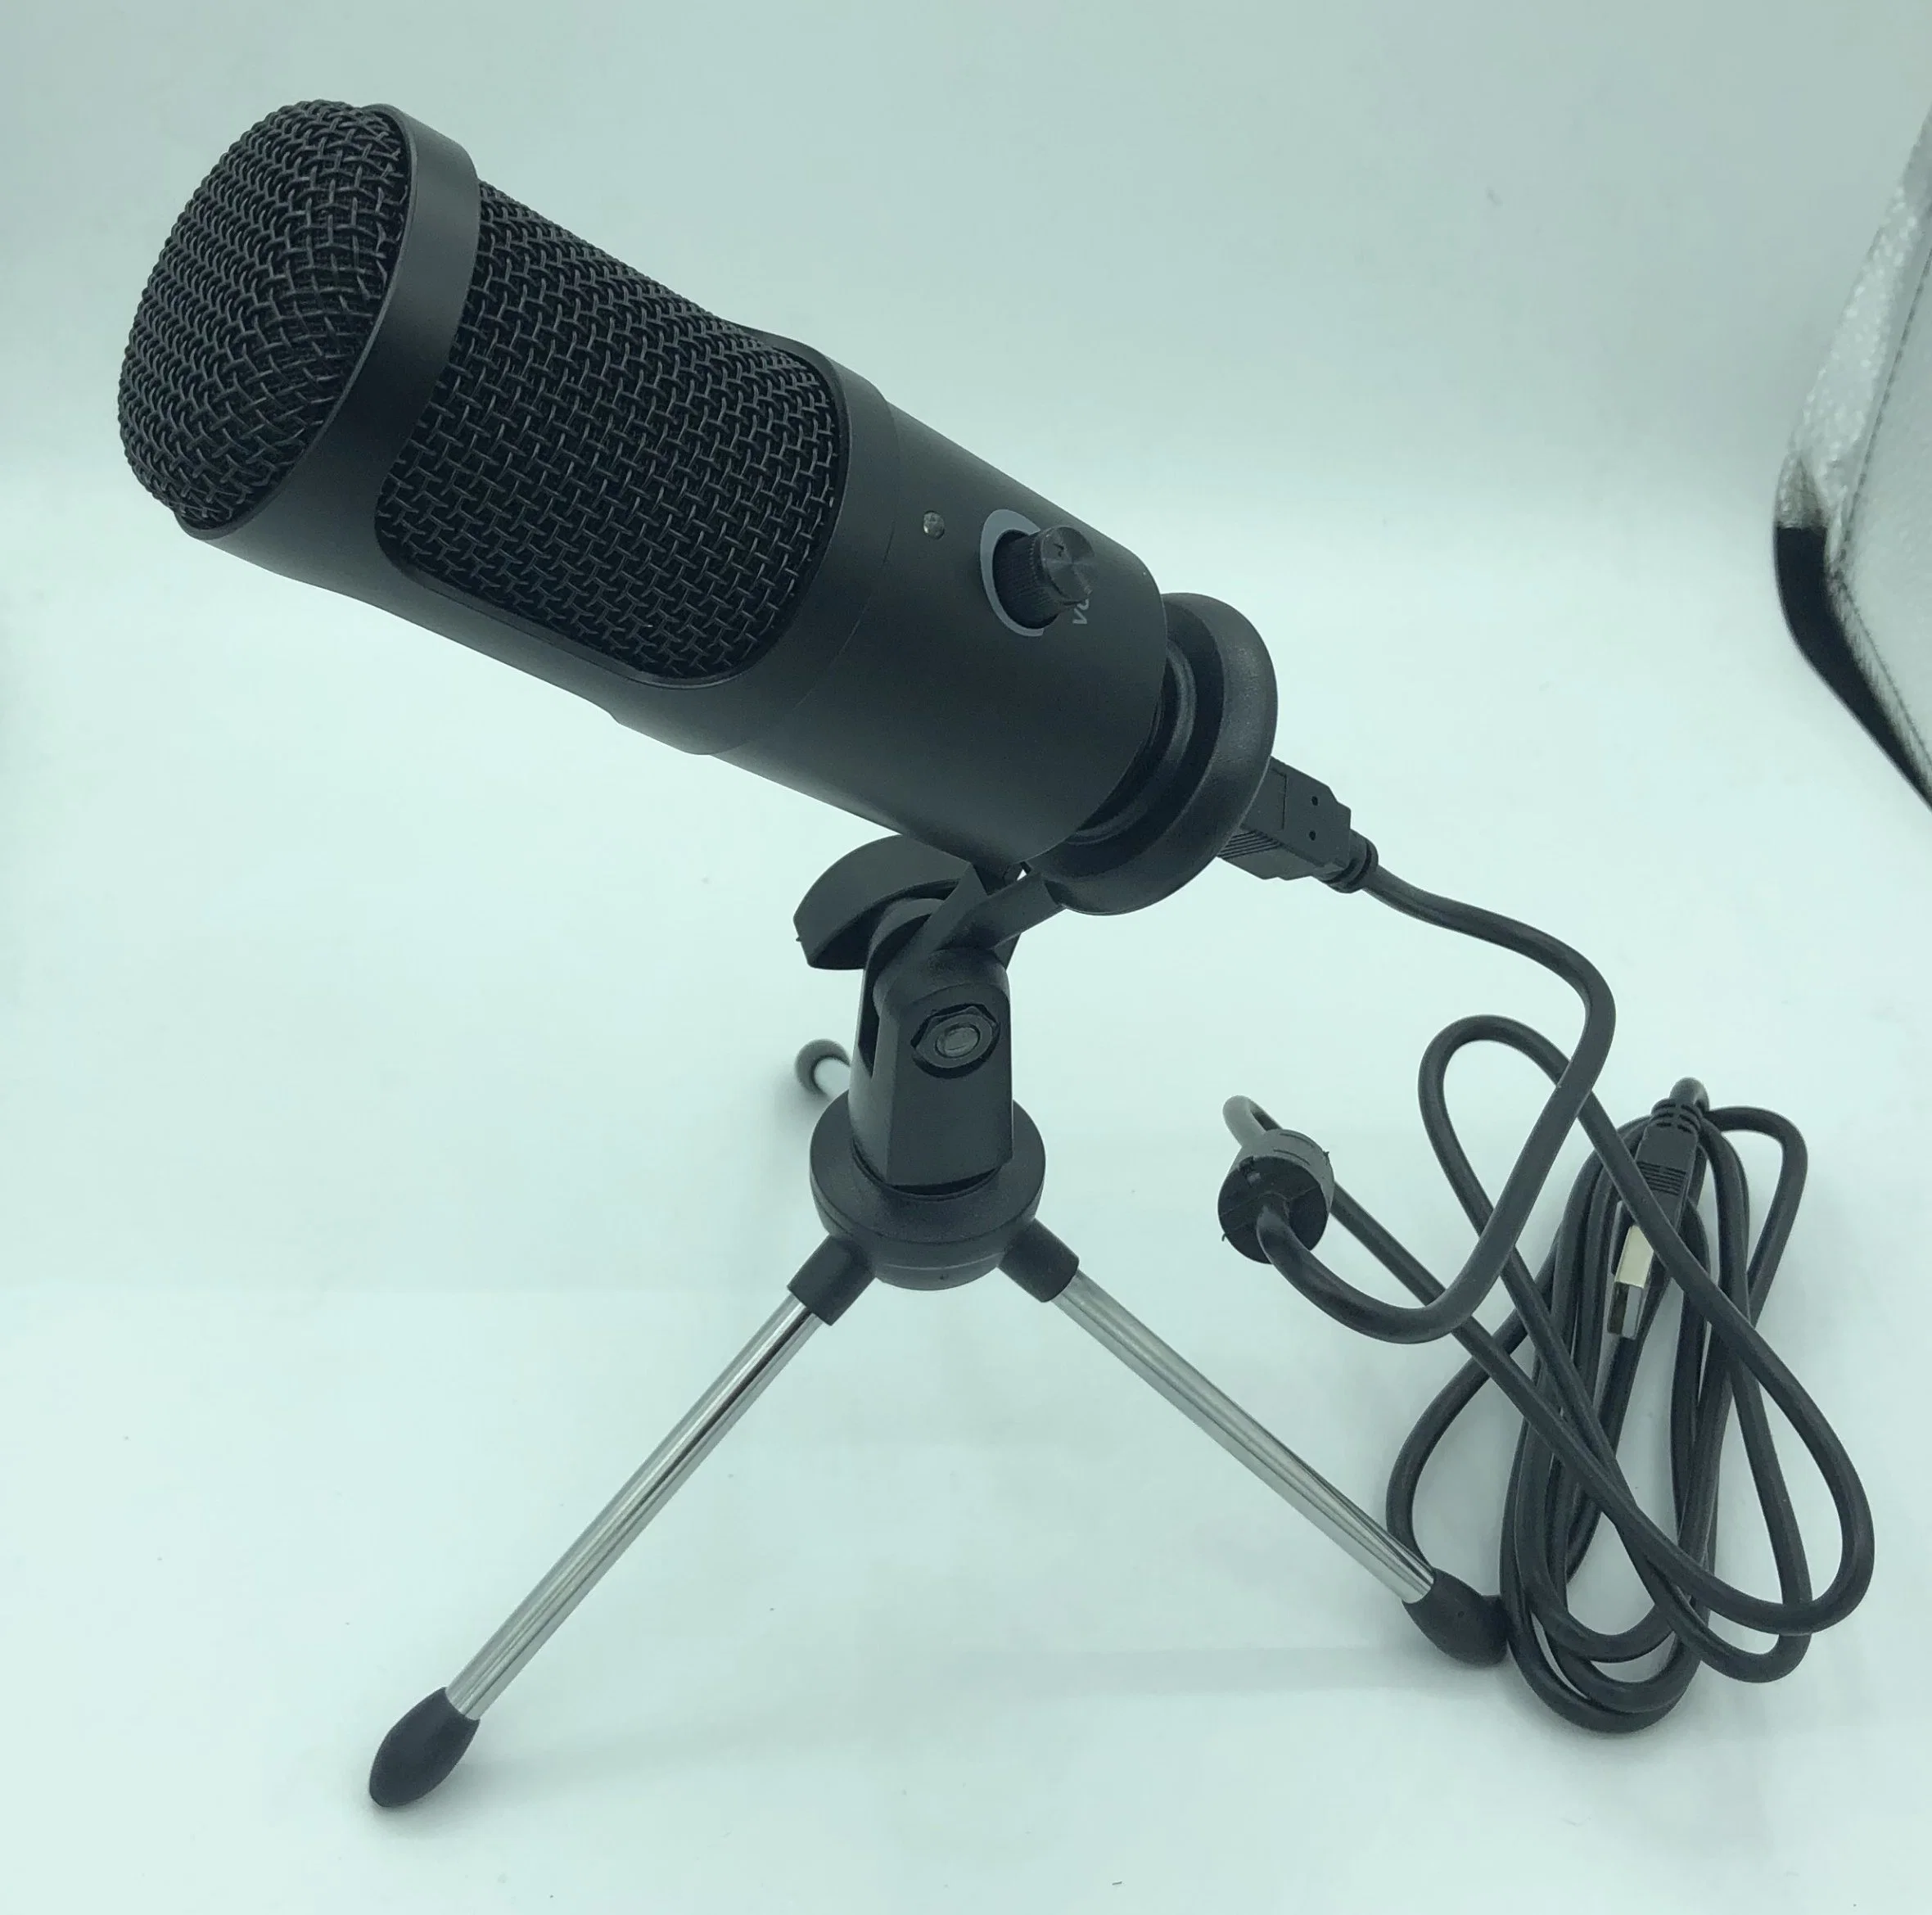 Condenser USB Microphone for Computer